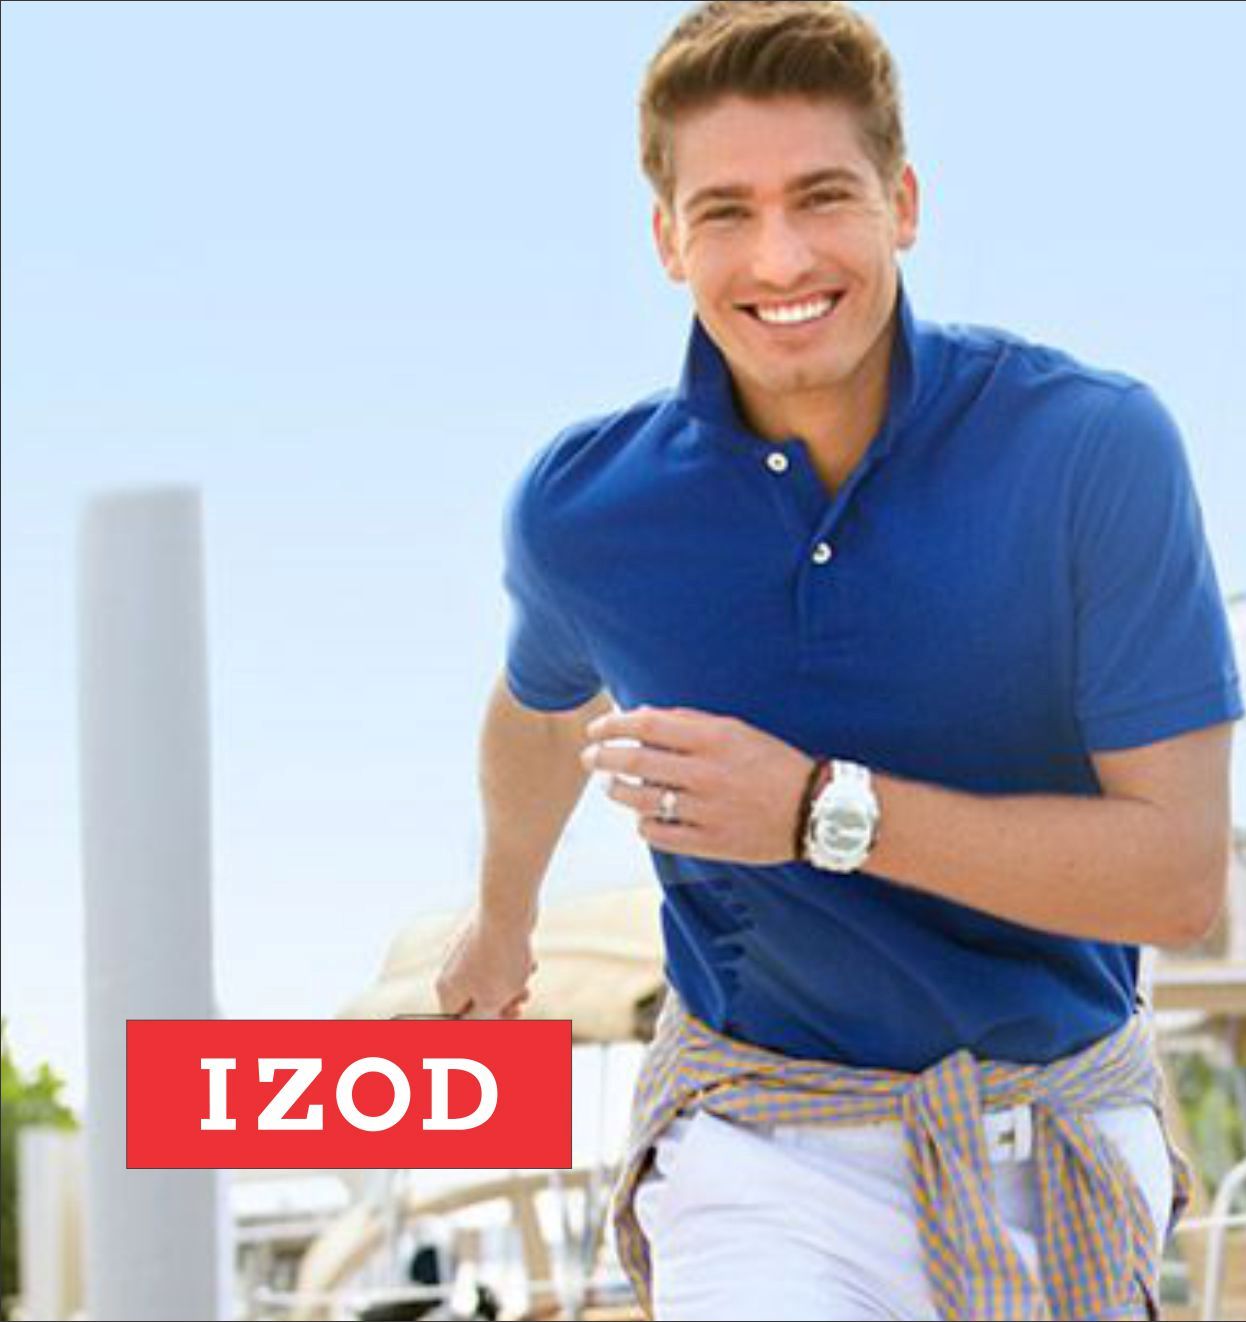 Offers at IZOD